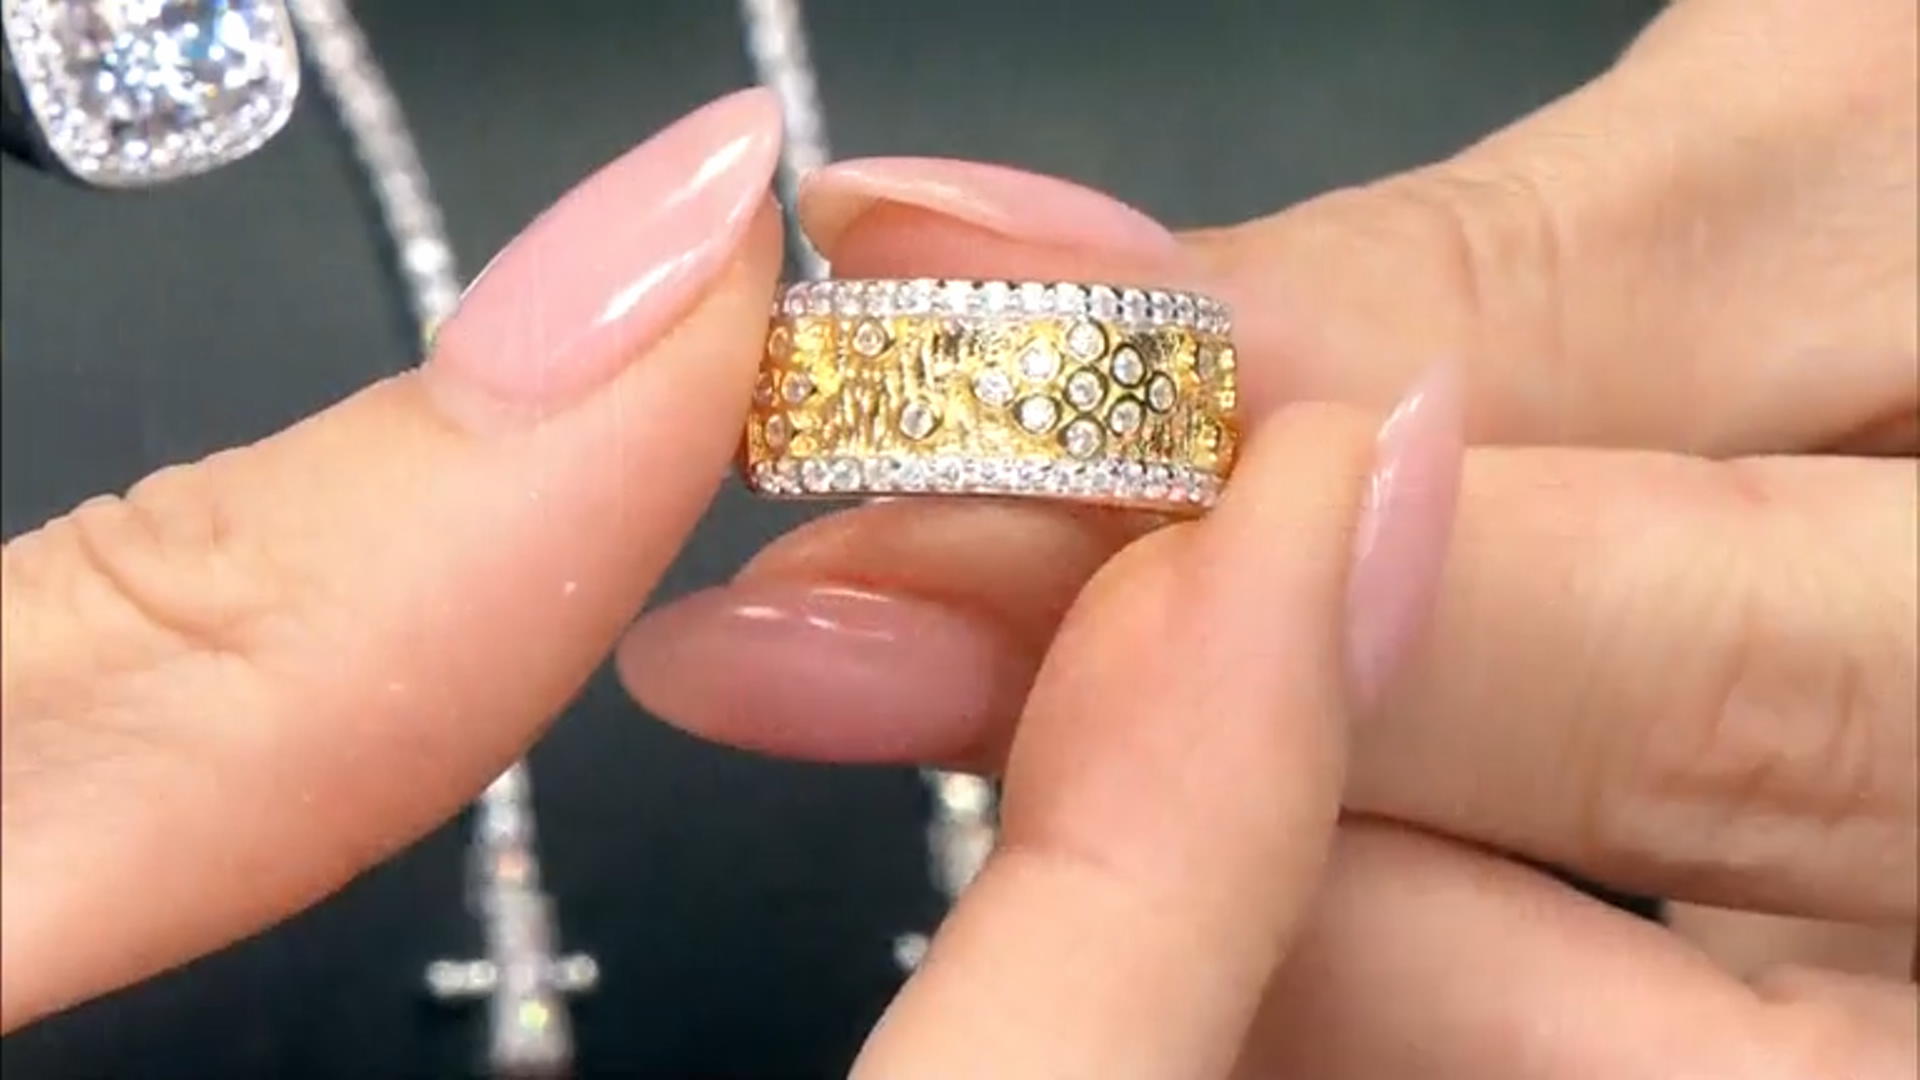 White Cubic Zirconia Rhodium And 18K Yellow Gold Over Sterling Silver Band Ring 1.26ctw Video Thumbnail